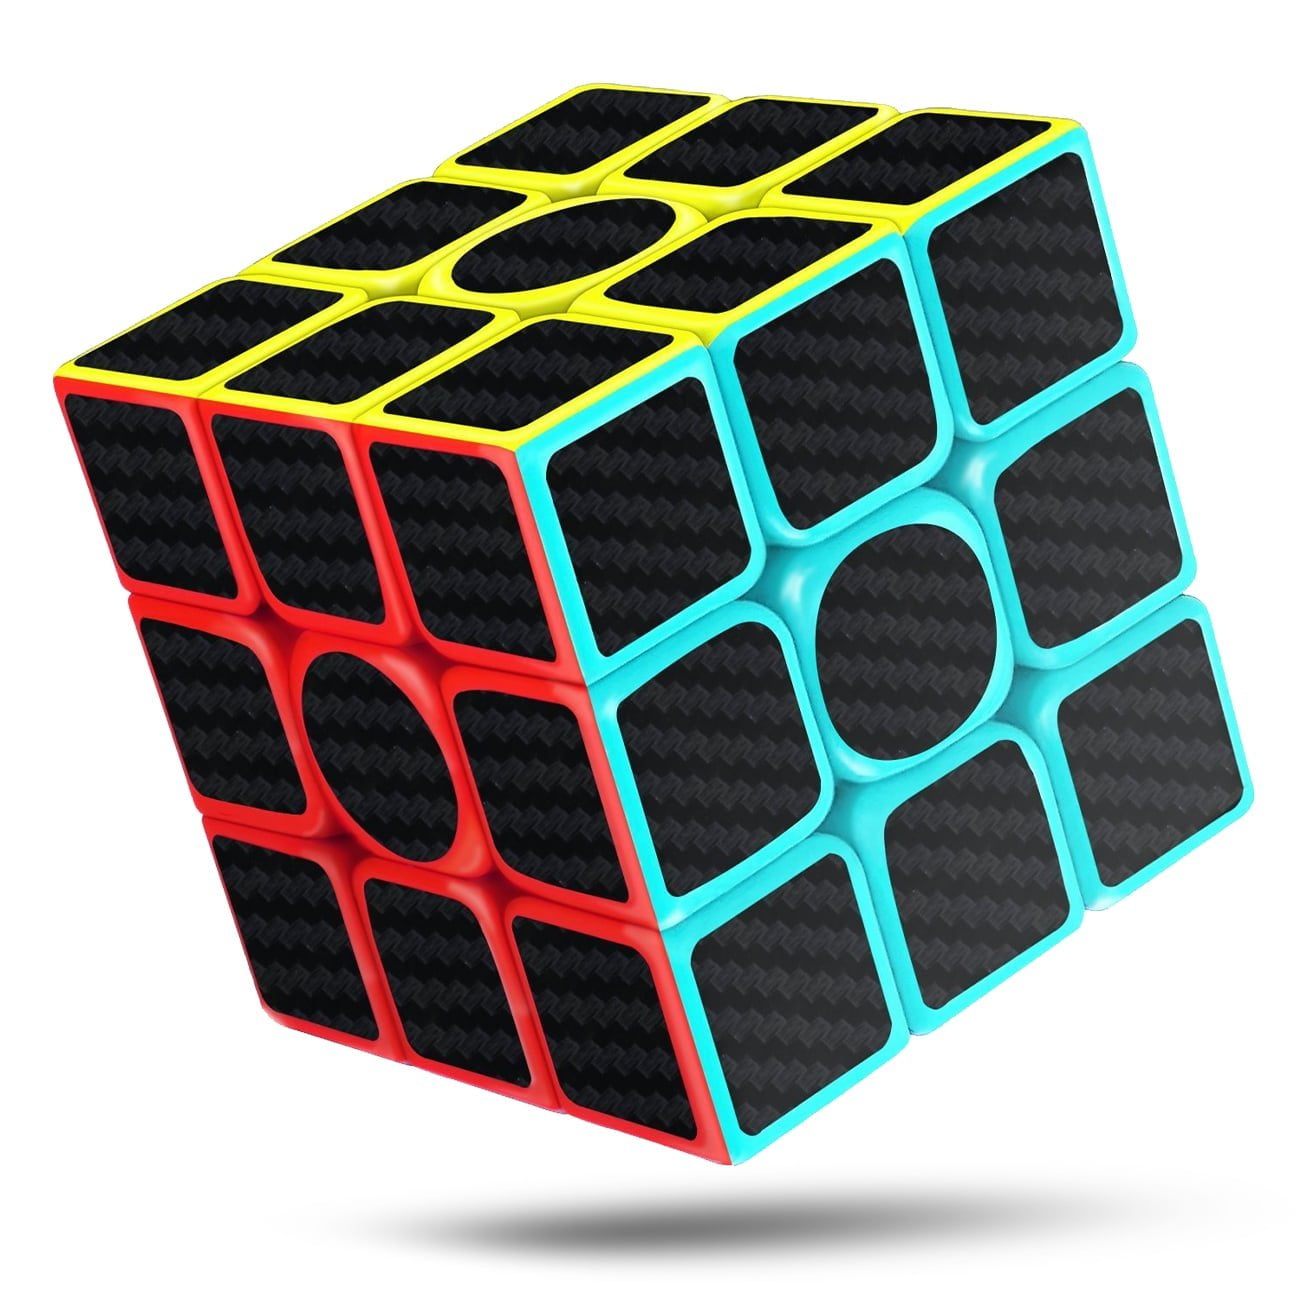 Moyu Puzzle Cube 3x3x3 Speed Cube Carbon Fiber Sticker for Smooth Magic Cube Toy 